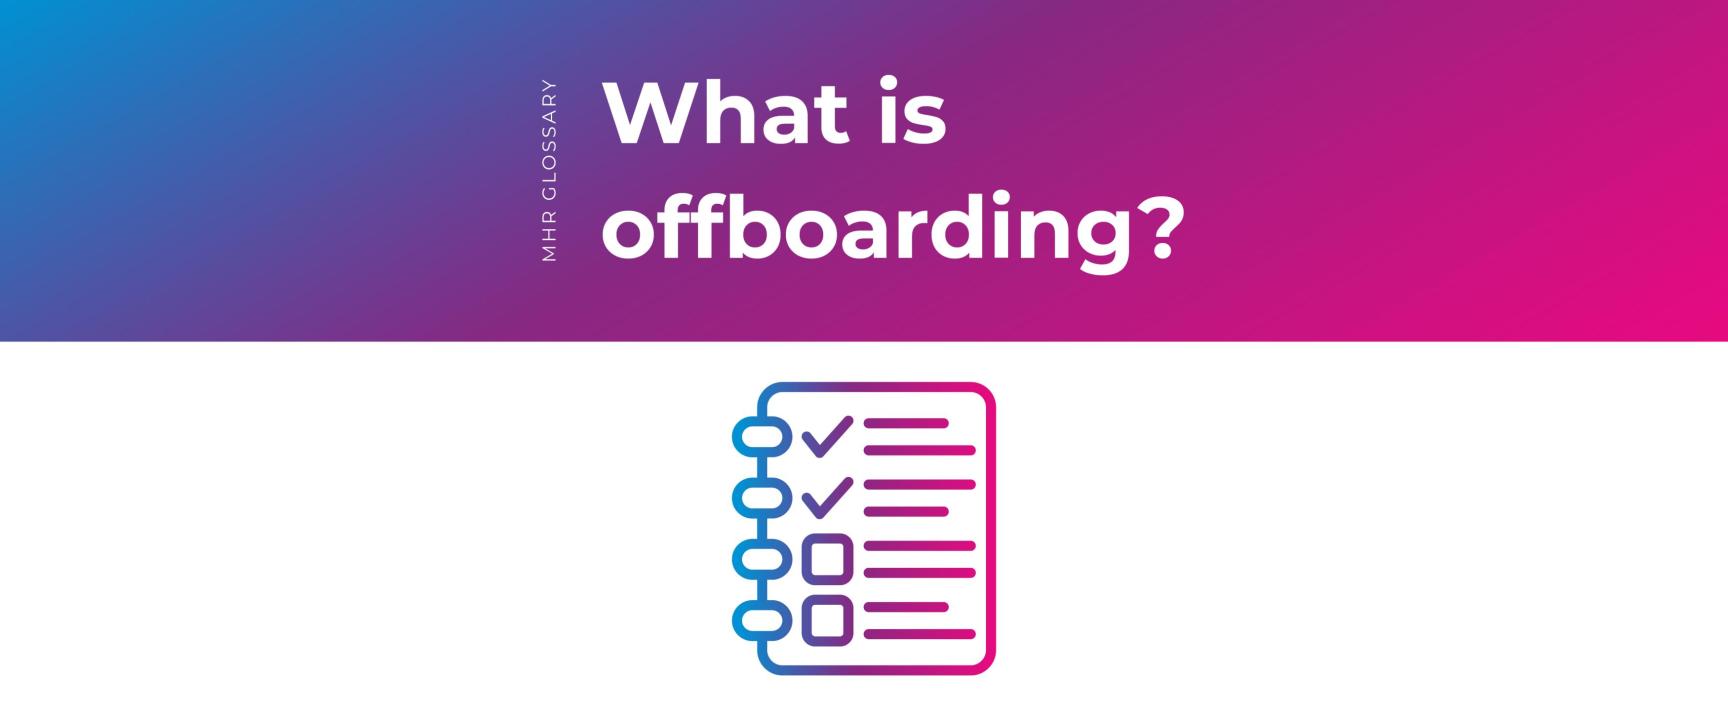 what is offboarding? with a checklist icon.